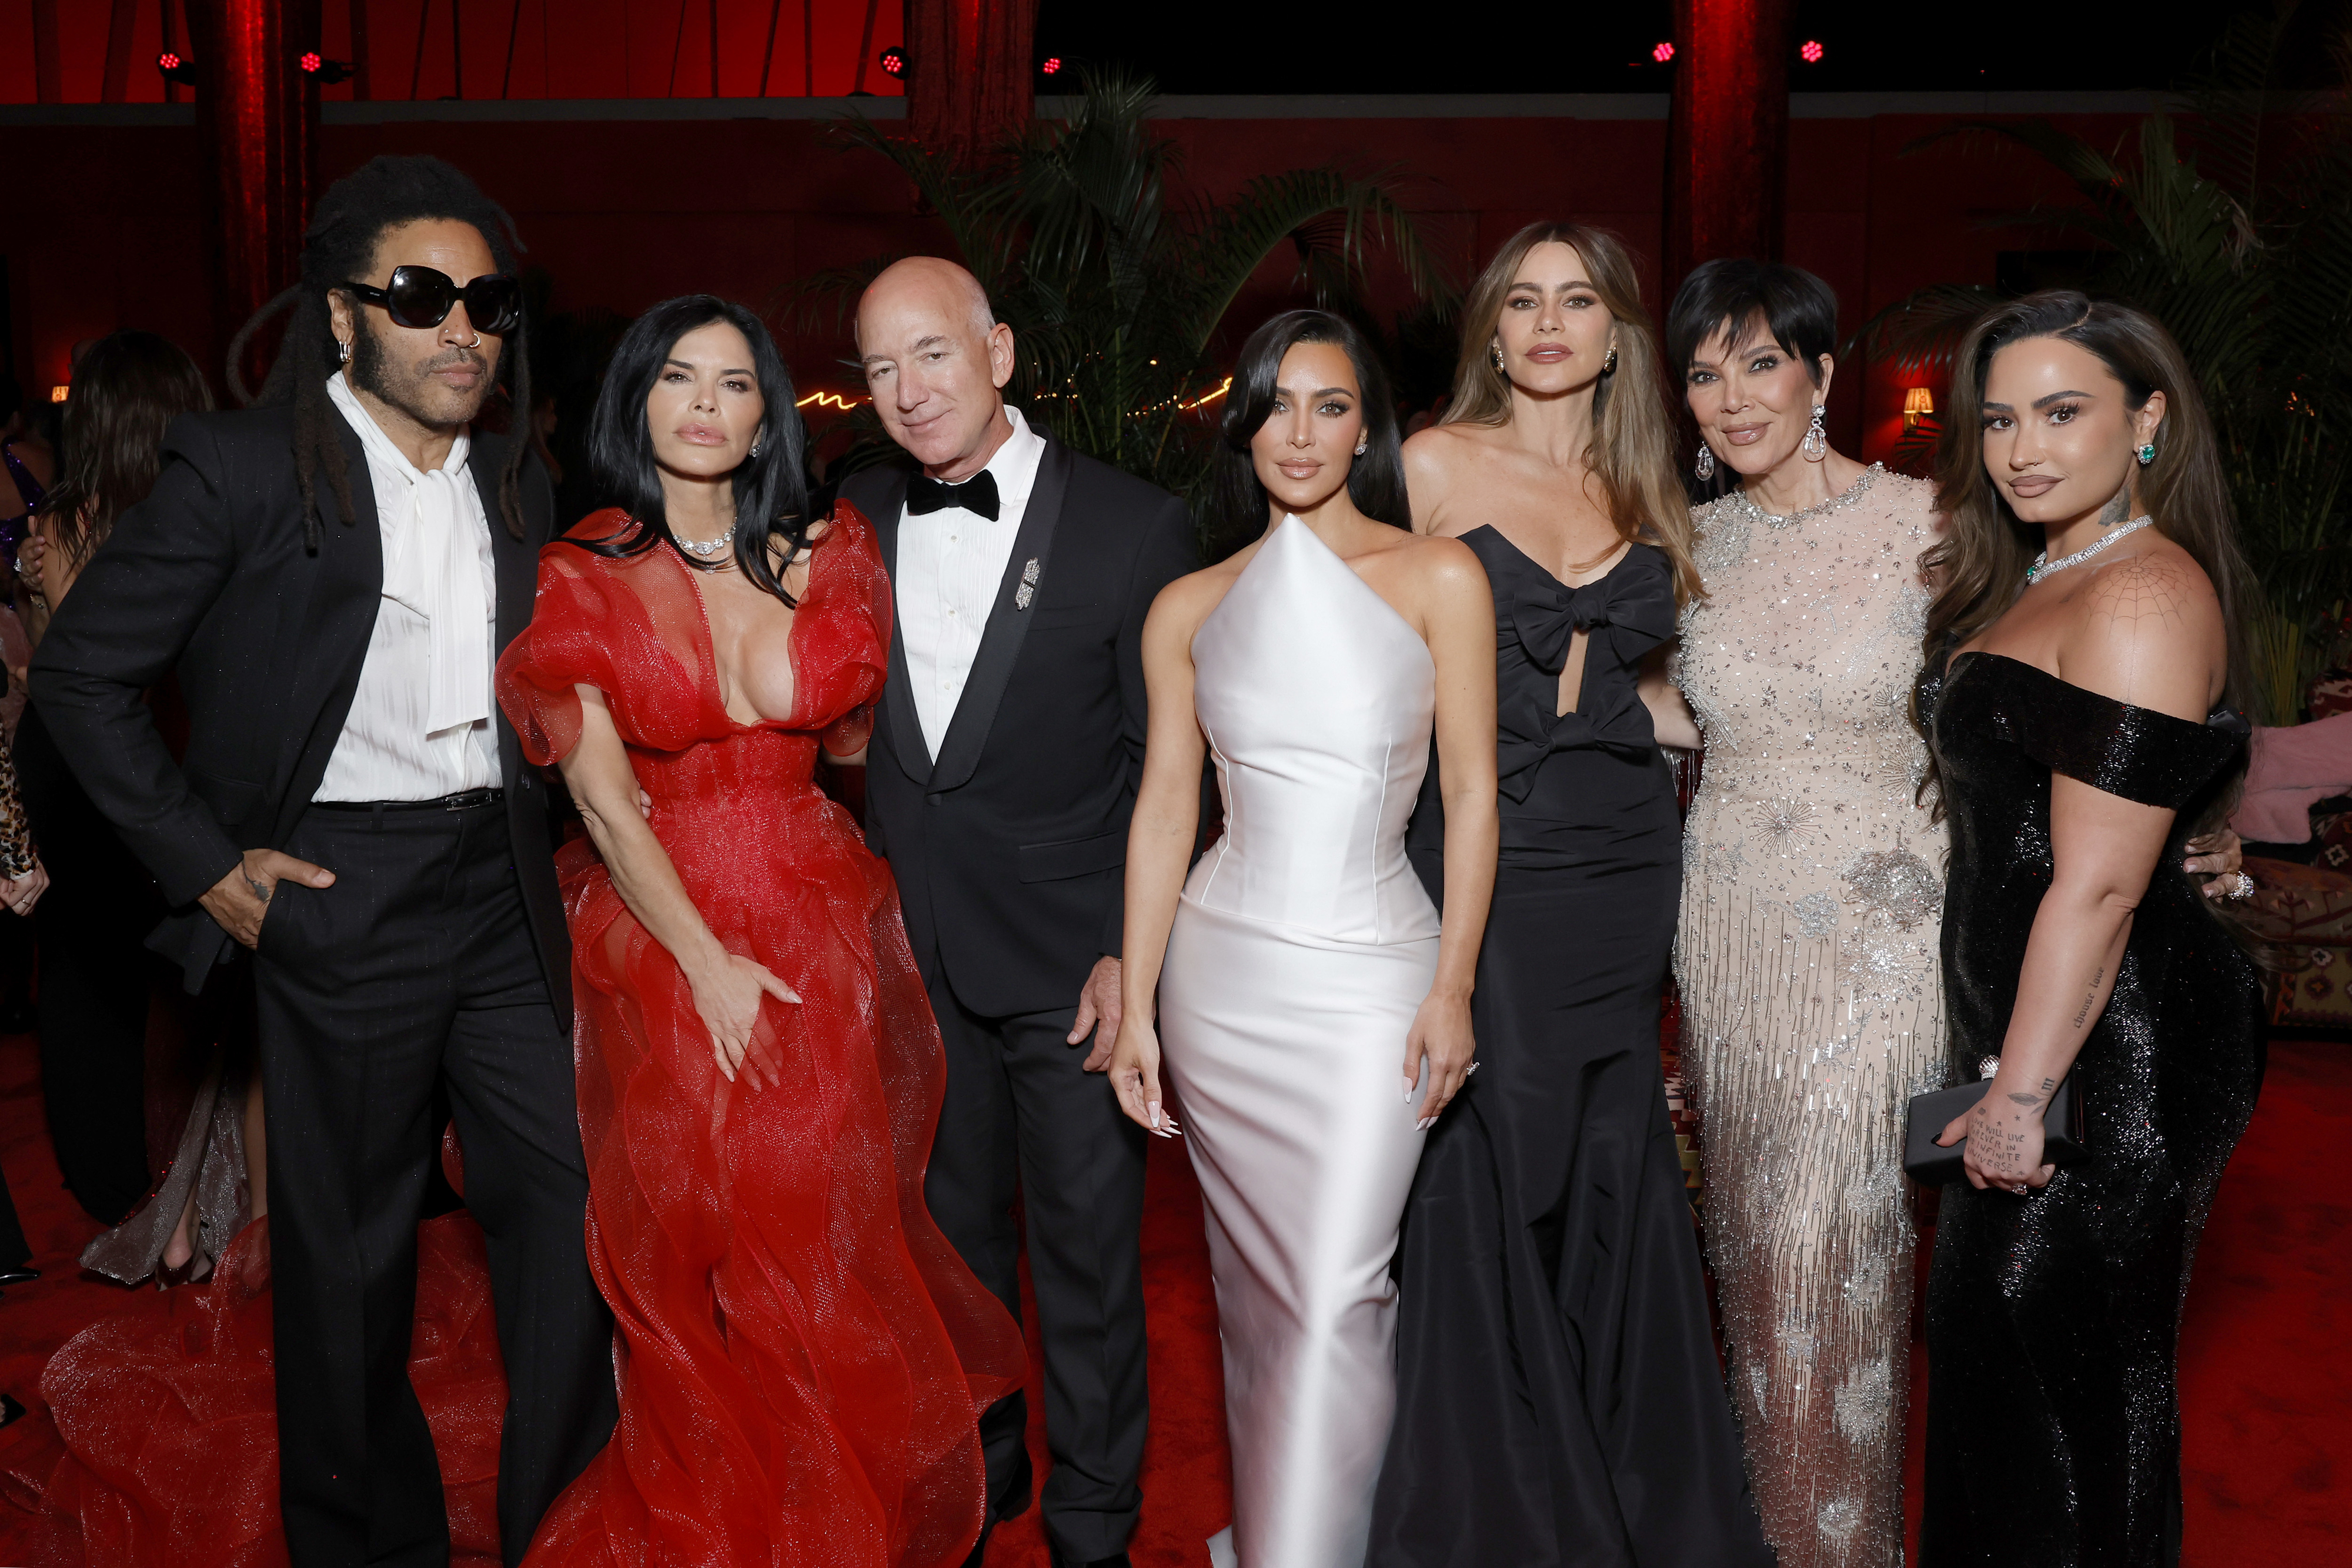 Kim at the after party posing for a photo with Lenny Kravitz, Lauren Sanchez, Jeff Bezos, Sofía Vergara, Kris Jenner, and Demi Lovato